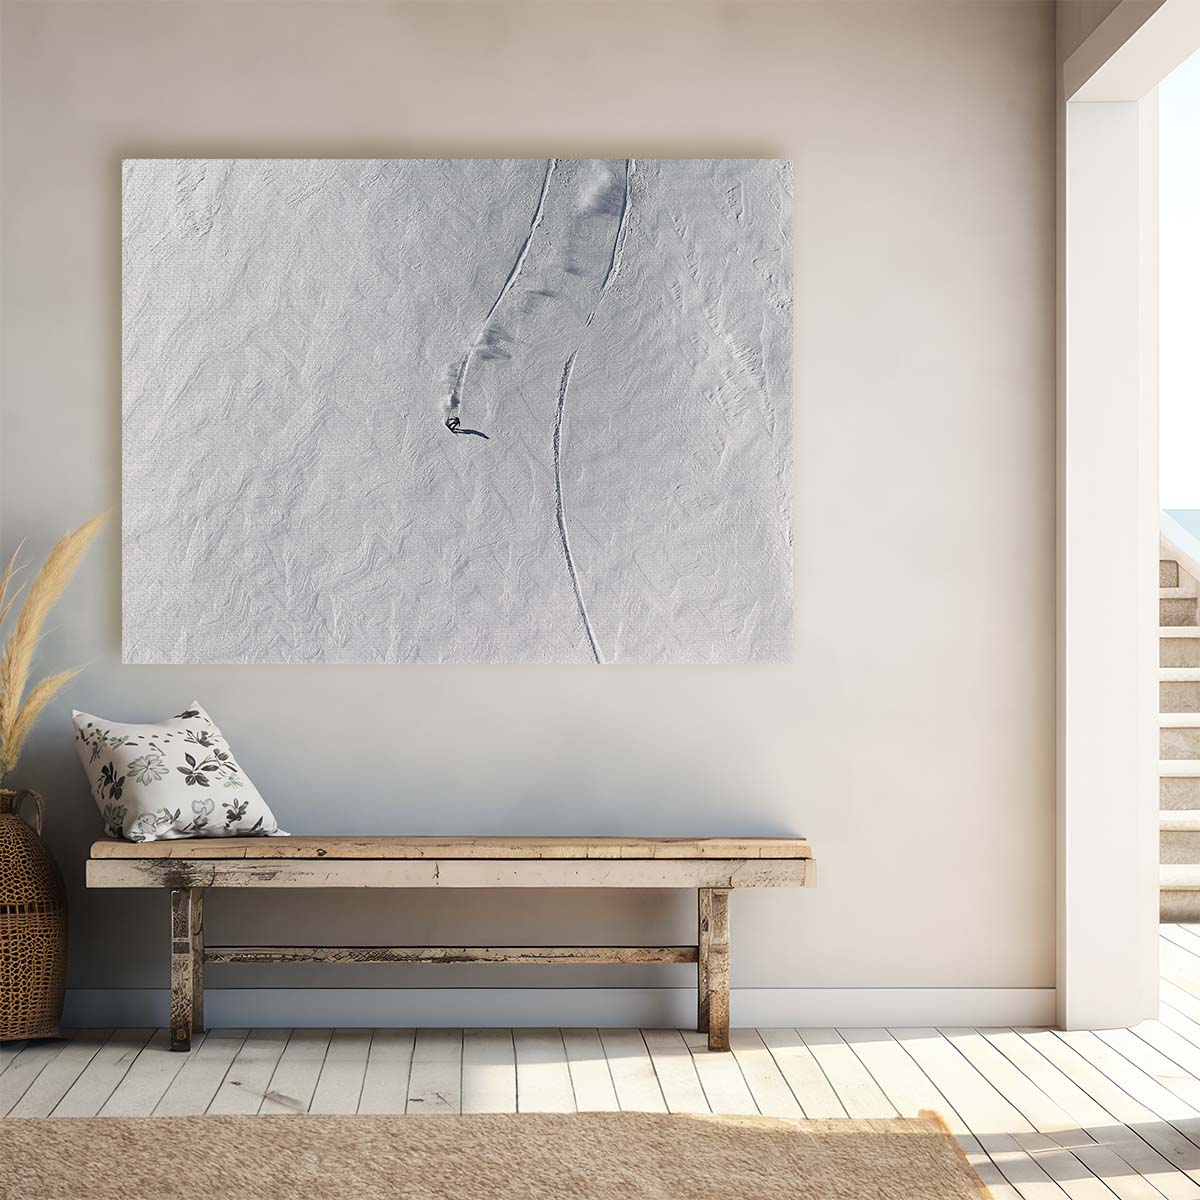 Extreme Snowboarding Adventure Monochrome Wall Art by Luxuriance Designs. Made in USA.